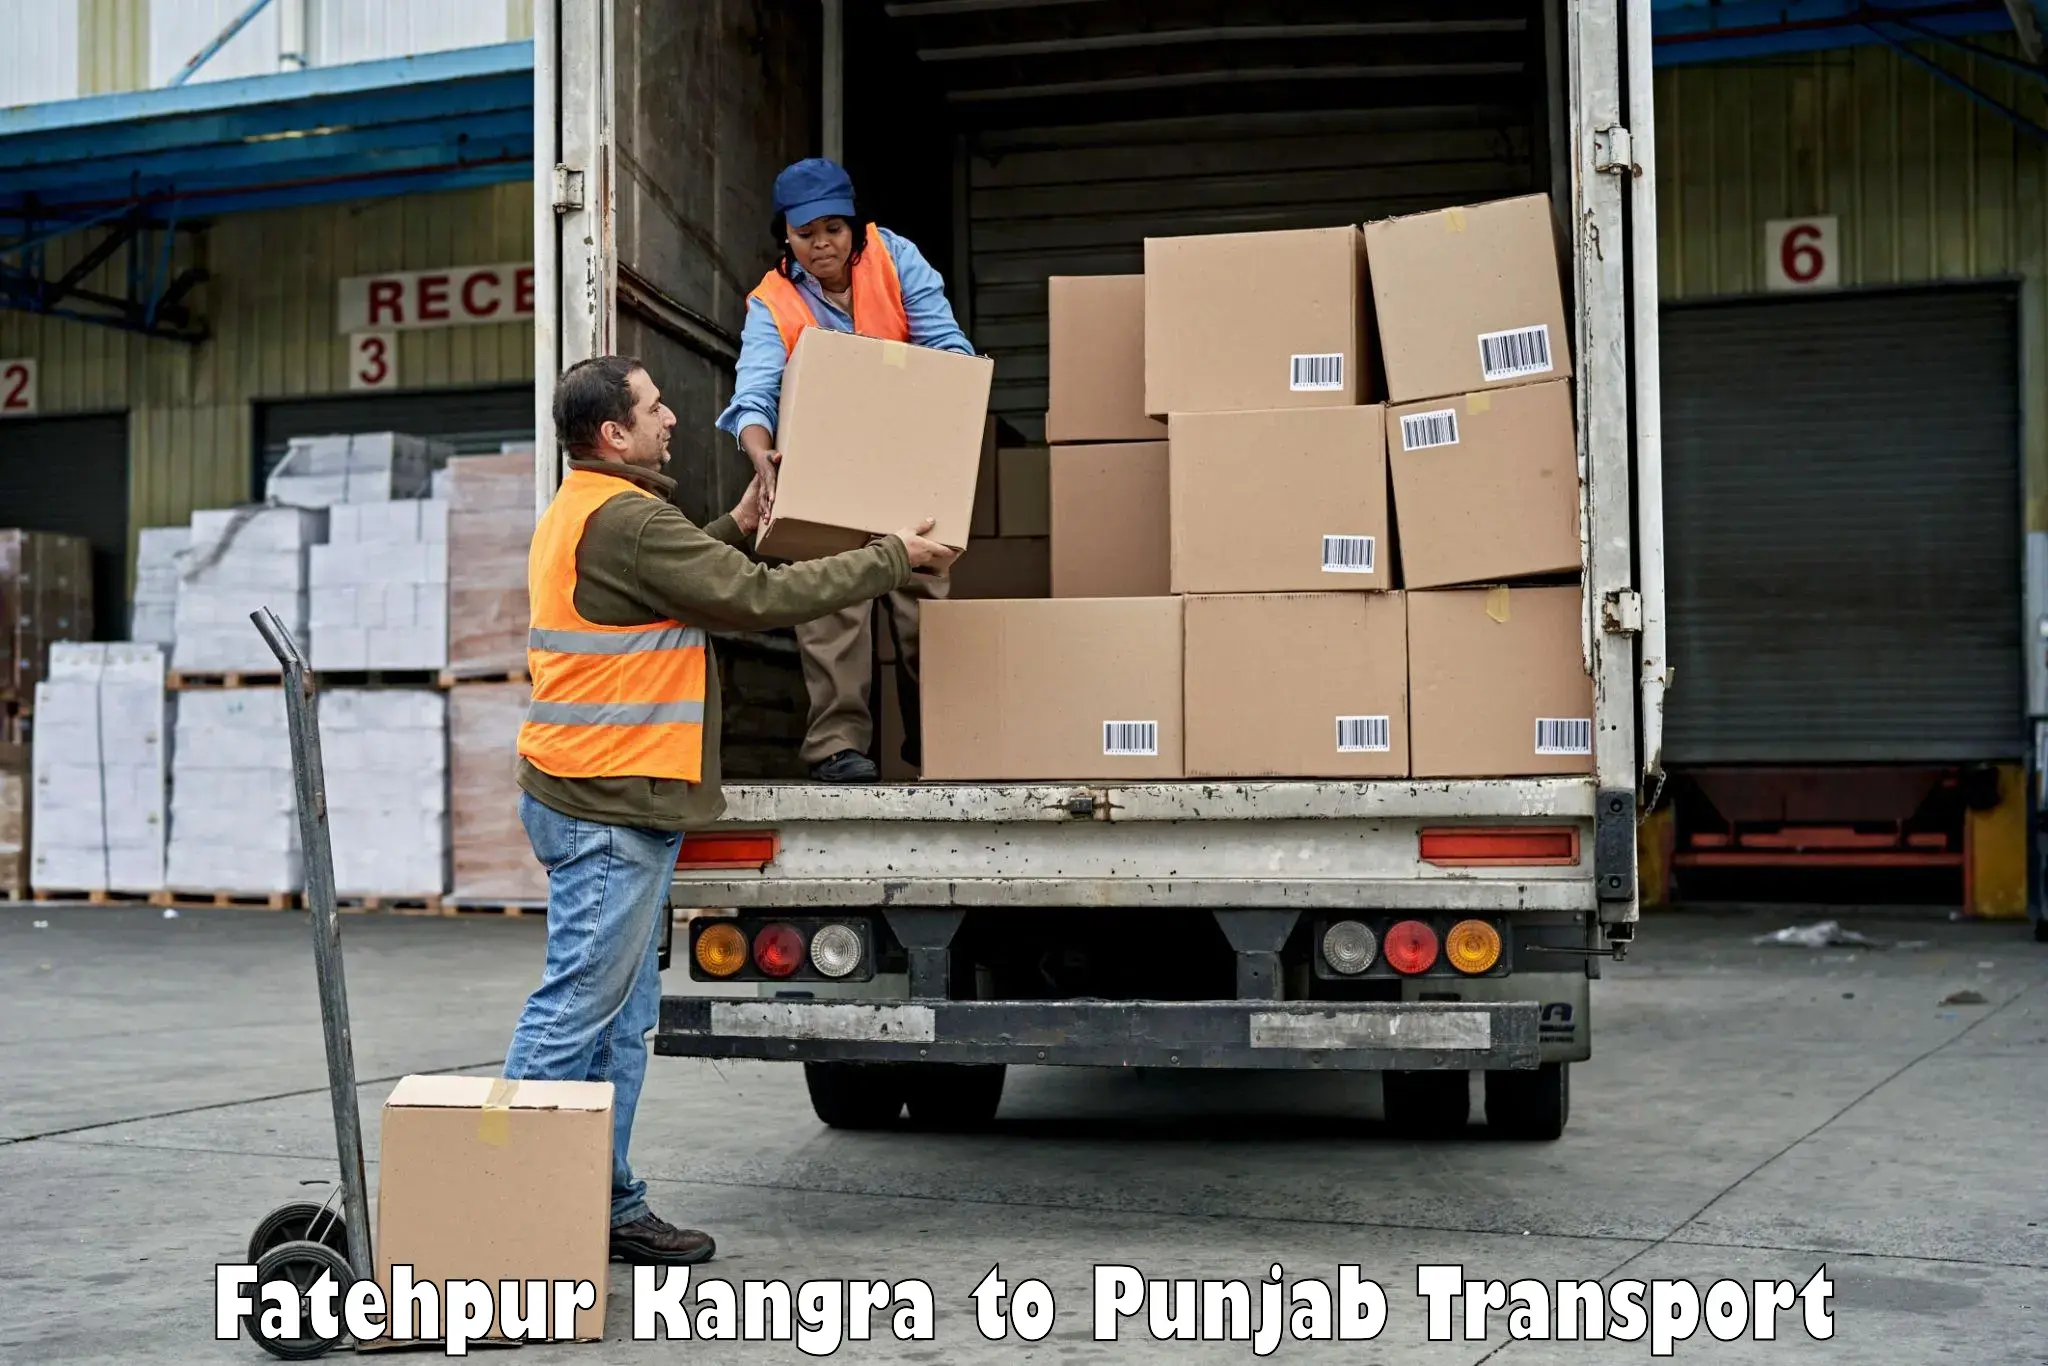 Parcel transport services Fatehpur Kangra to Pathankot